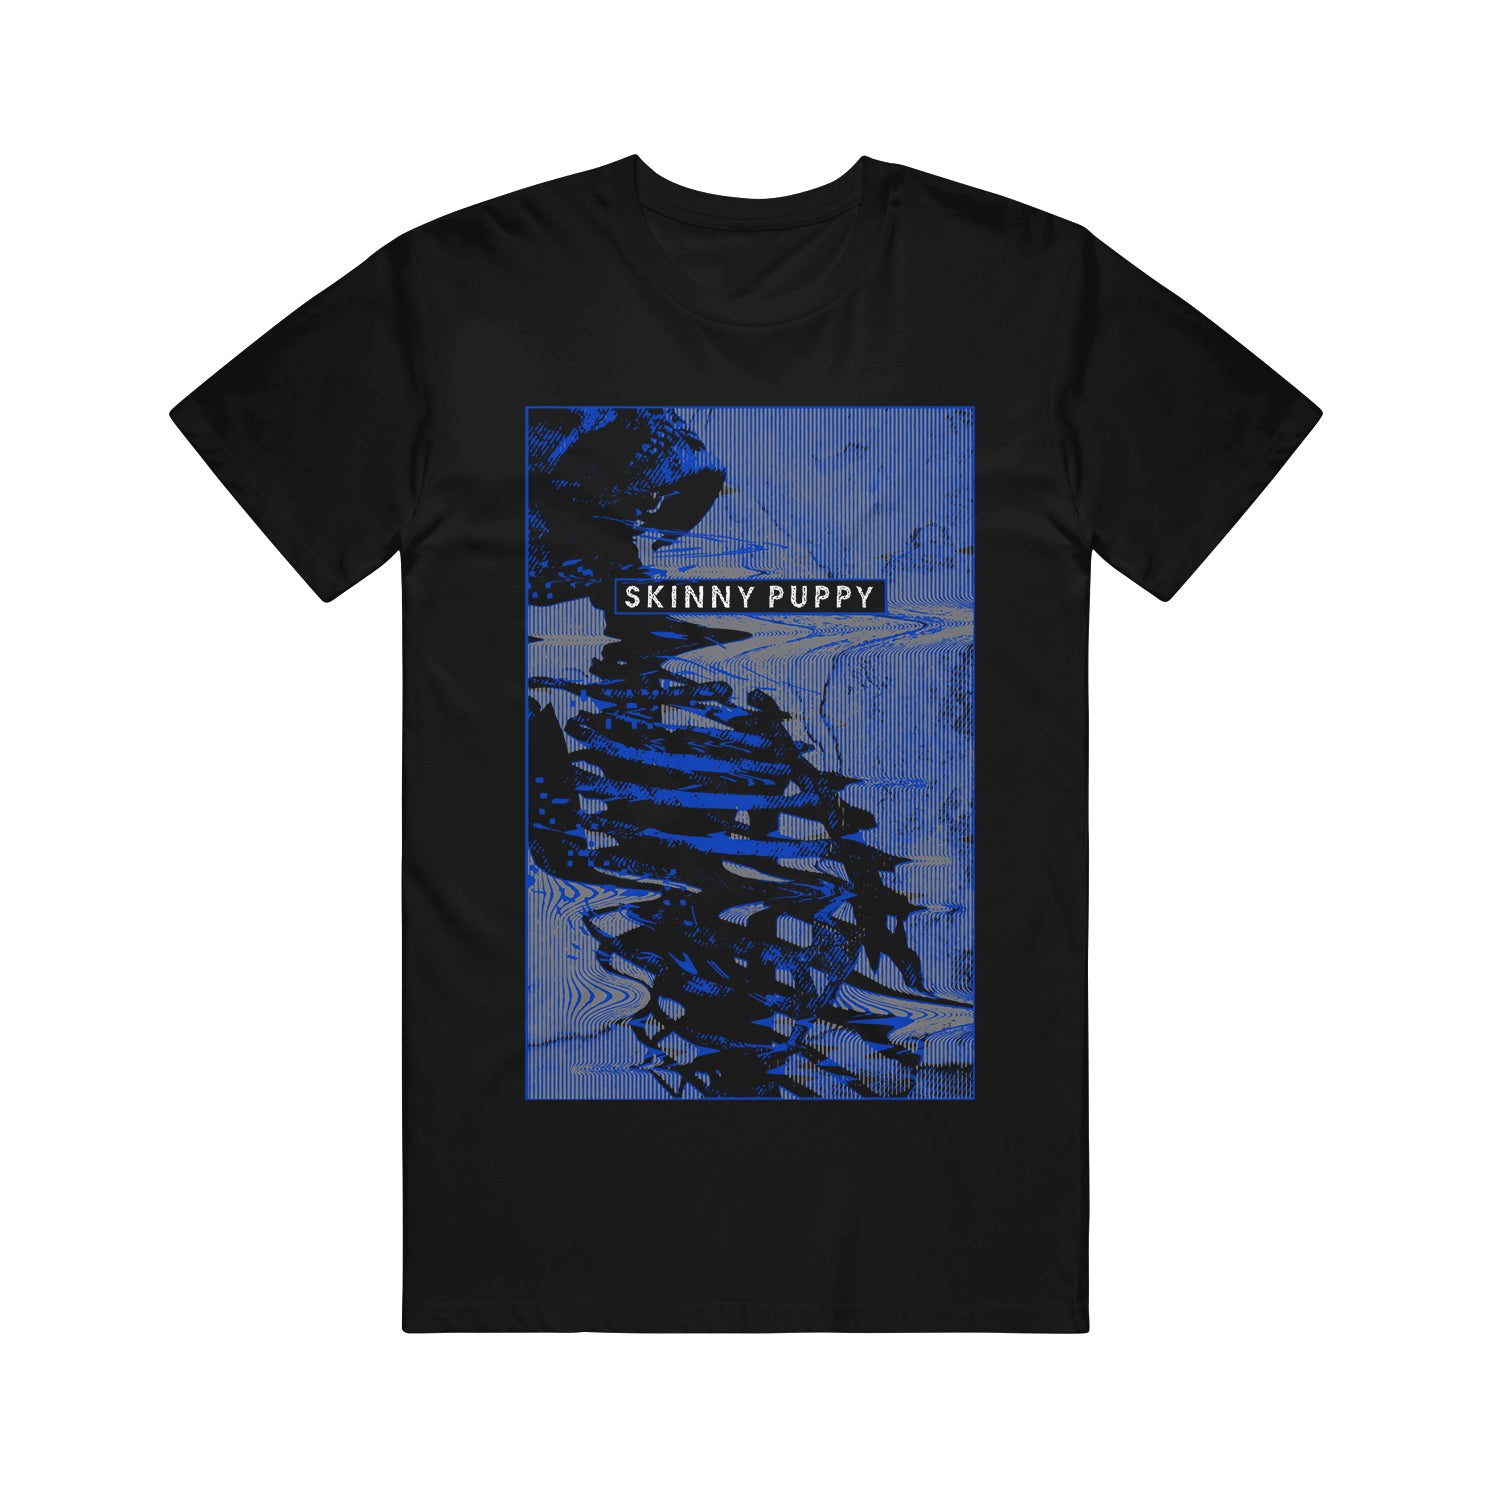 Black tshirt on a white background. The tshirt has a large rectangle in the middle of the shirt, with the design inside. The rectangle is blue. There is a skeleton- the head and upper body showing. Across the chest area in a small black rectangle with white writing it says Skinny Puppy. The design of the skeleton and lines are glitchy and swirled.